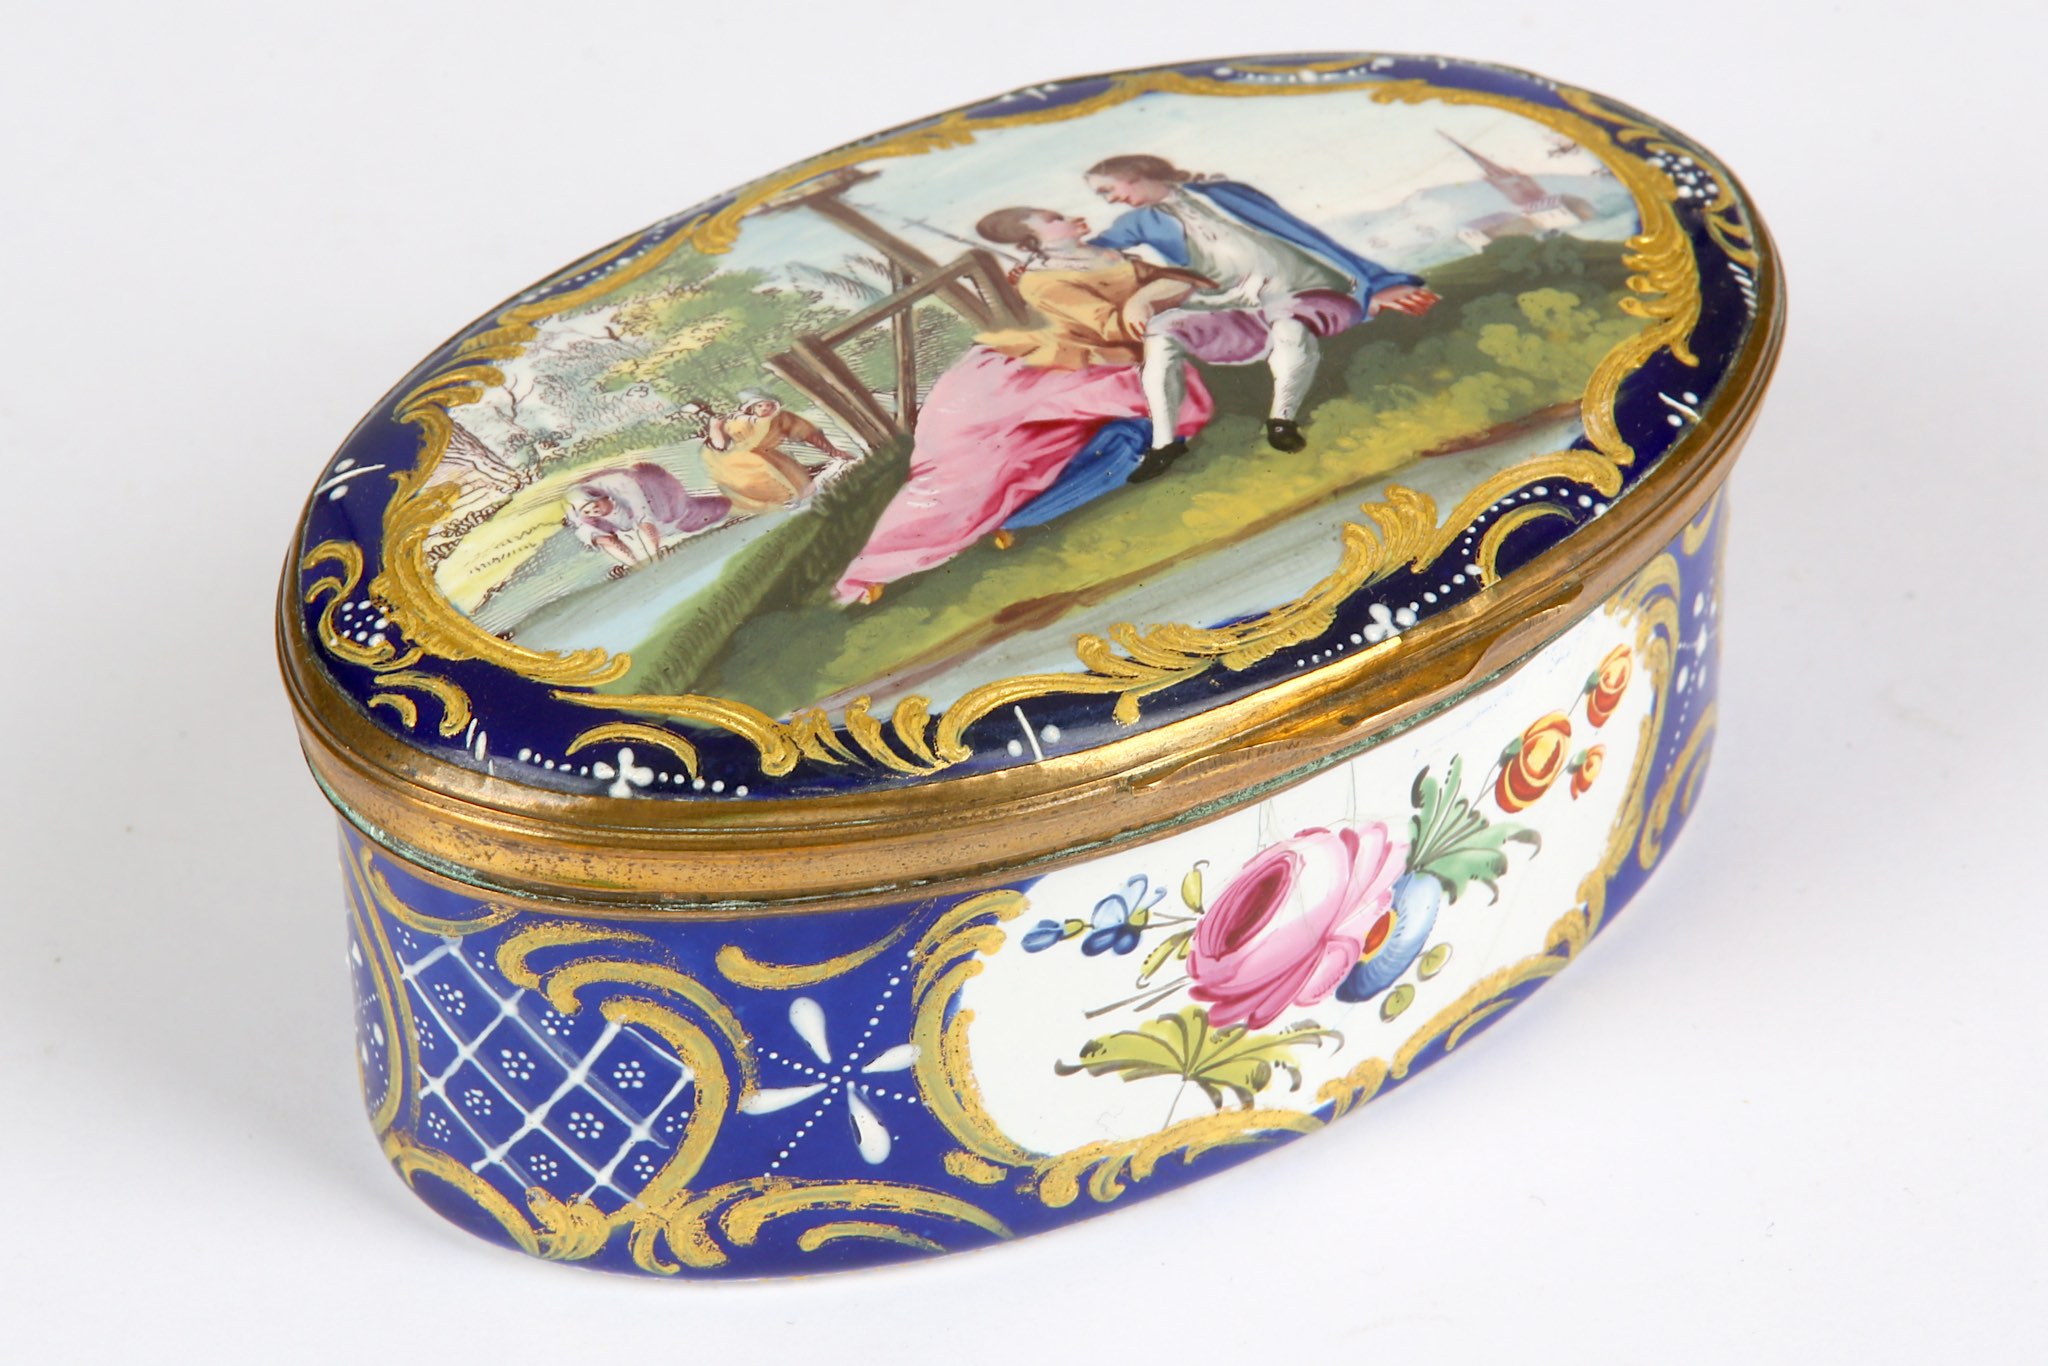 A LARGE BIRMINGHAM OR SOUTH STAFFORDSHIRE ENAMEL SNUFF BOX, circa 1770, of oval form with gilt metal - Image 2 of 7